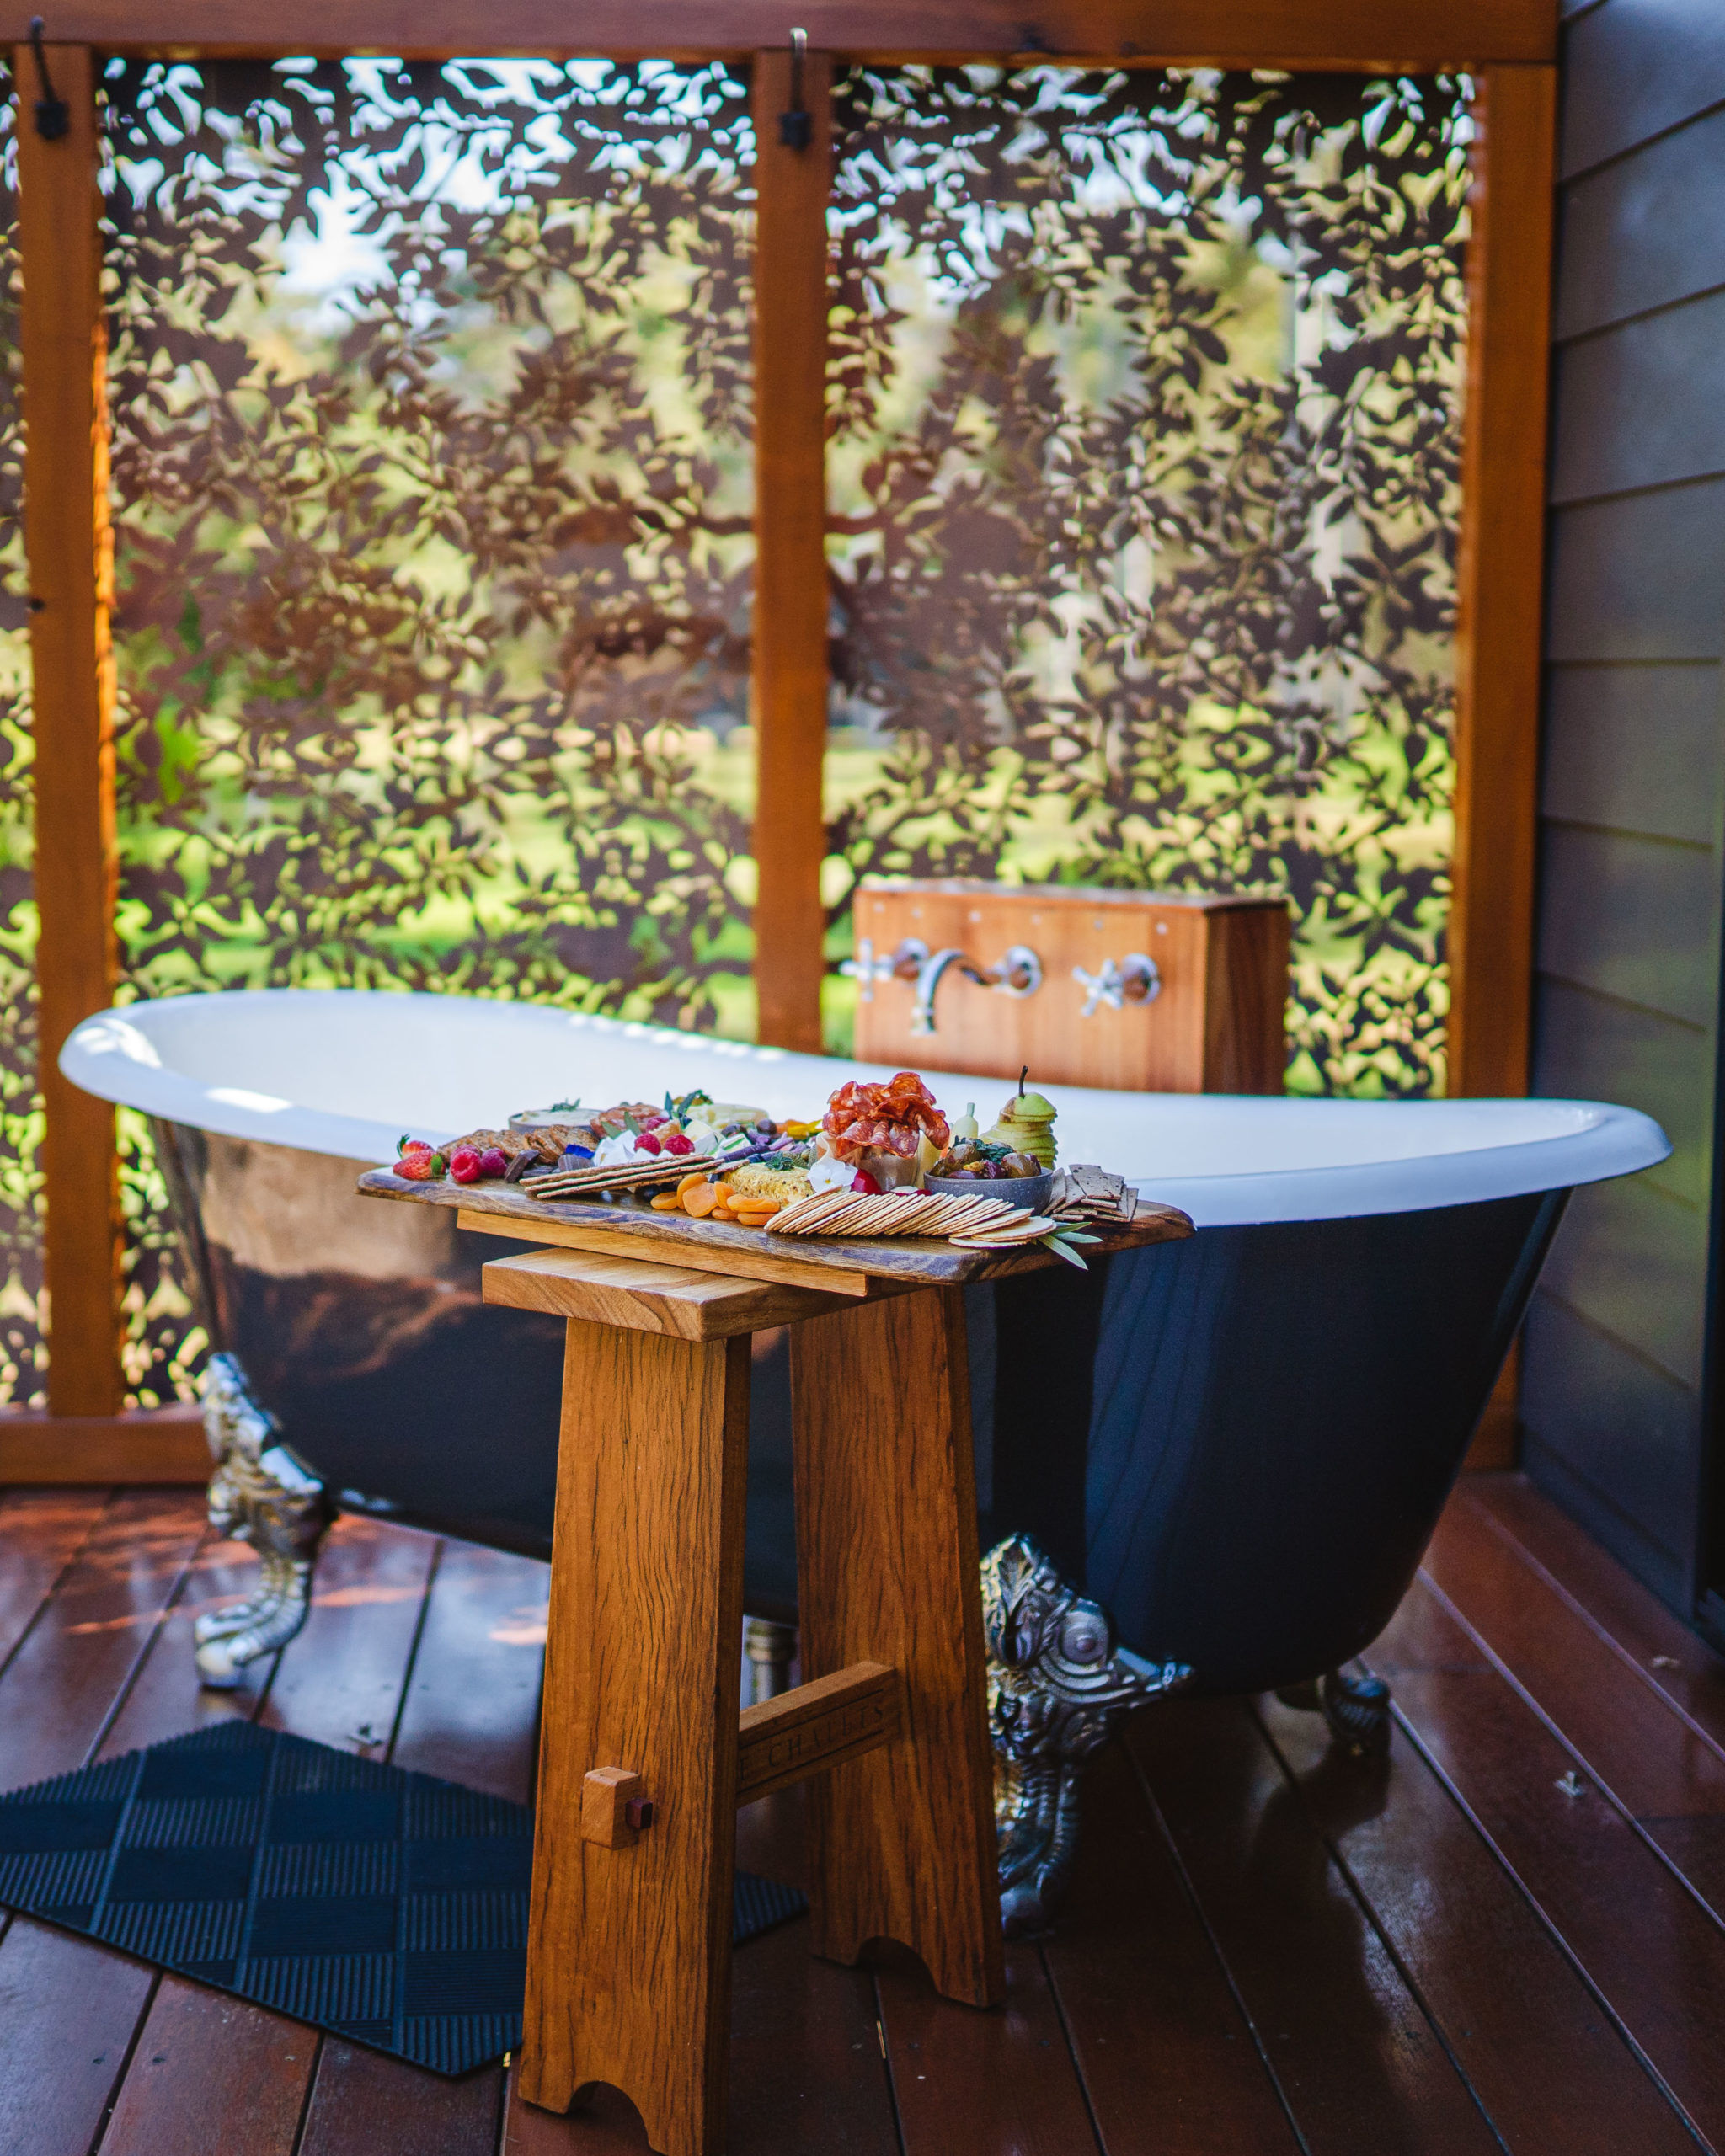 Romantic experiences - Outdoor bath with grazing board at Tree chalets. Credit Dylan Alcock.